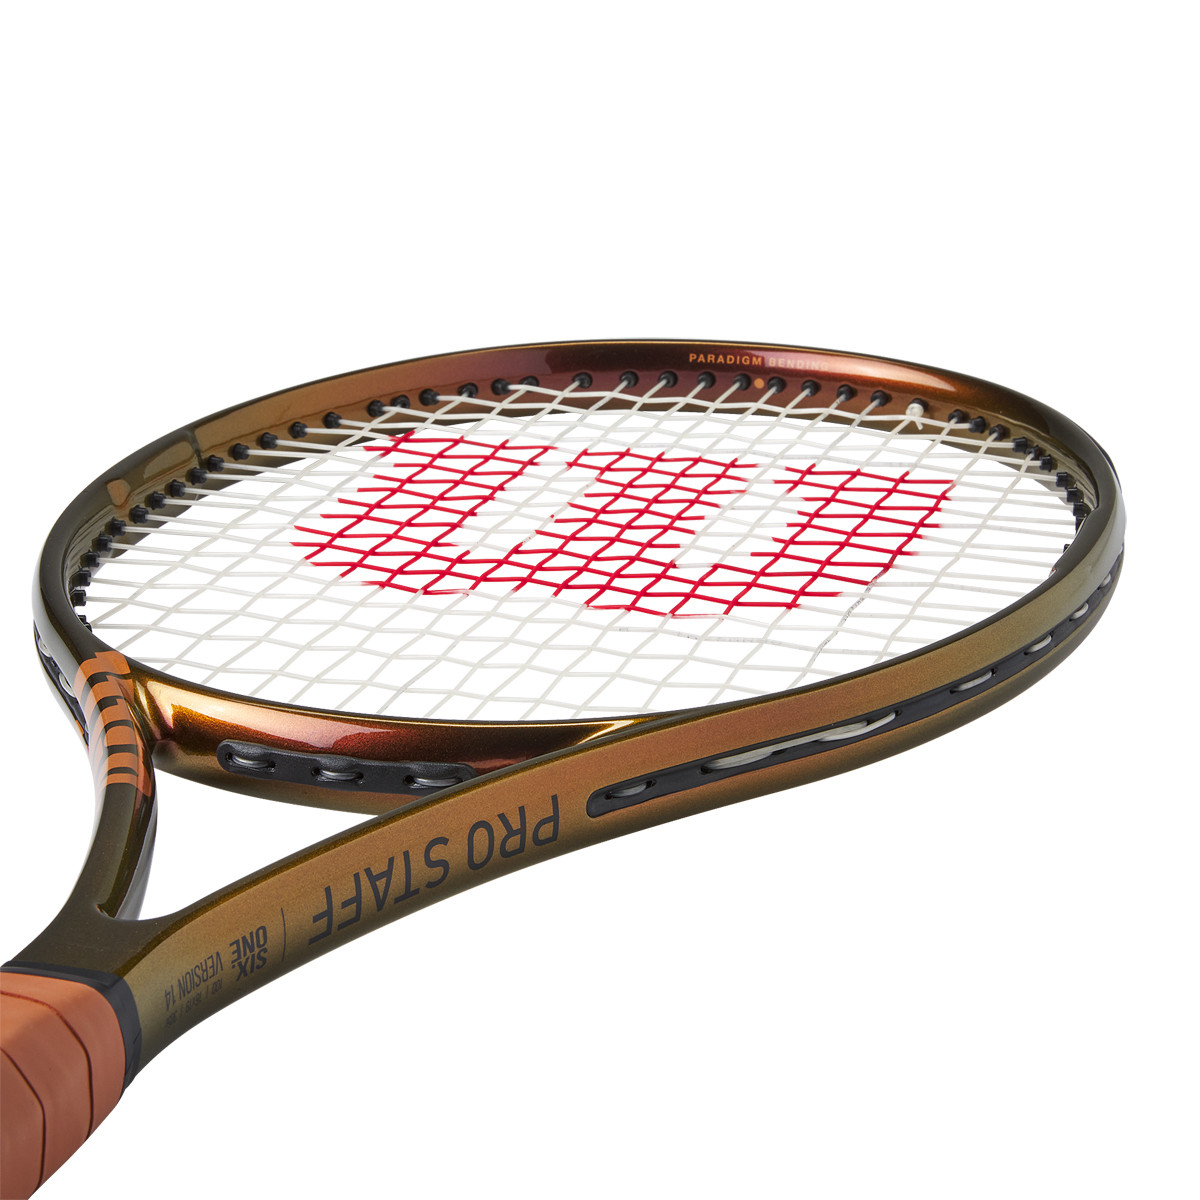 WILSON PRO STAFF SIX ONE 100 V14 (305 GR) (LIMITED EDITION) RACKET 